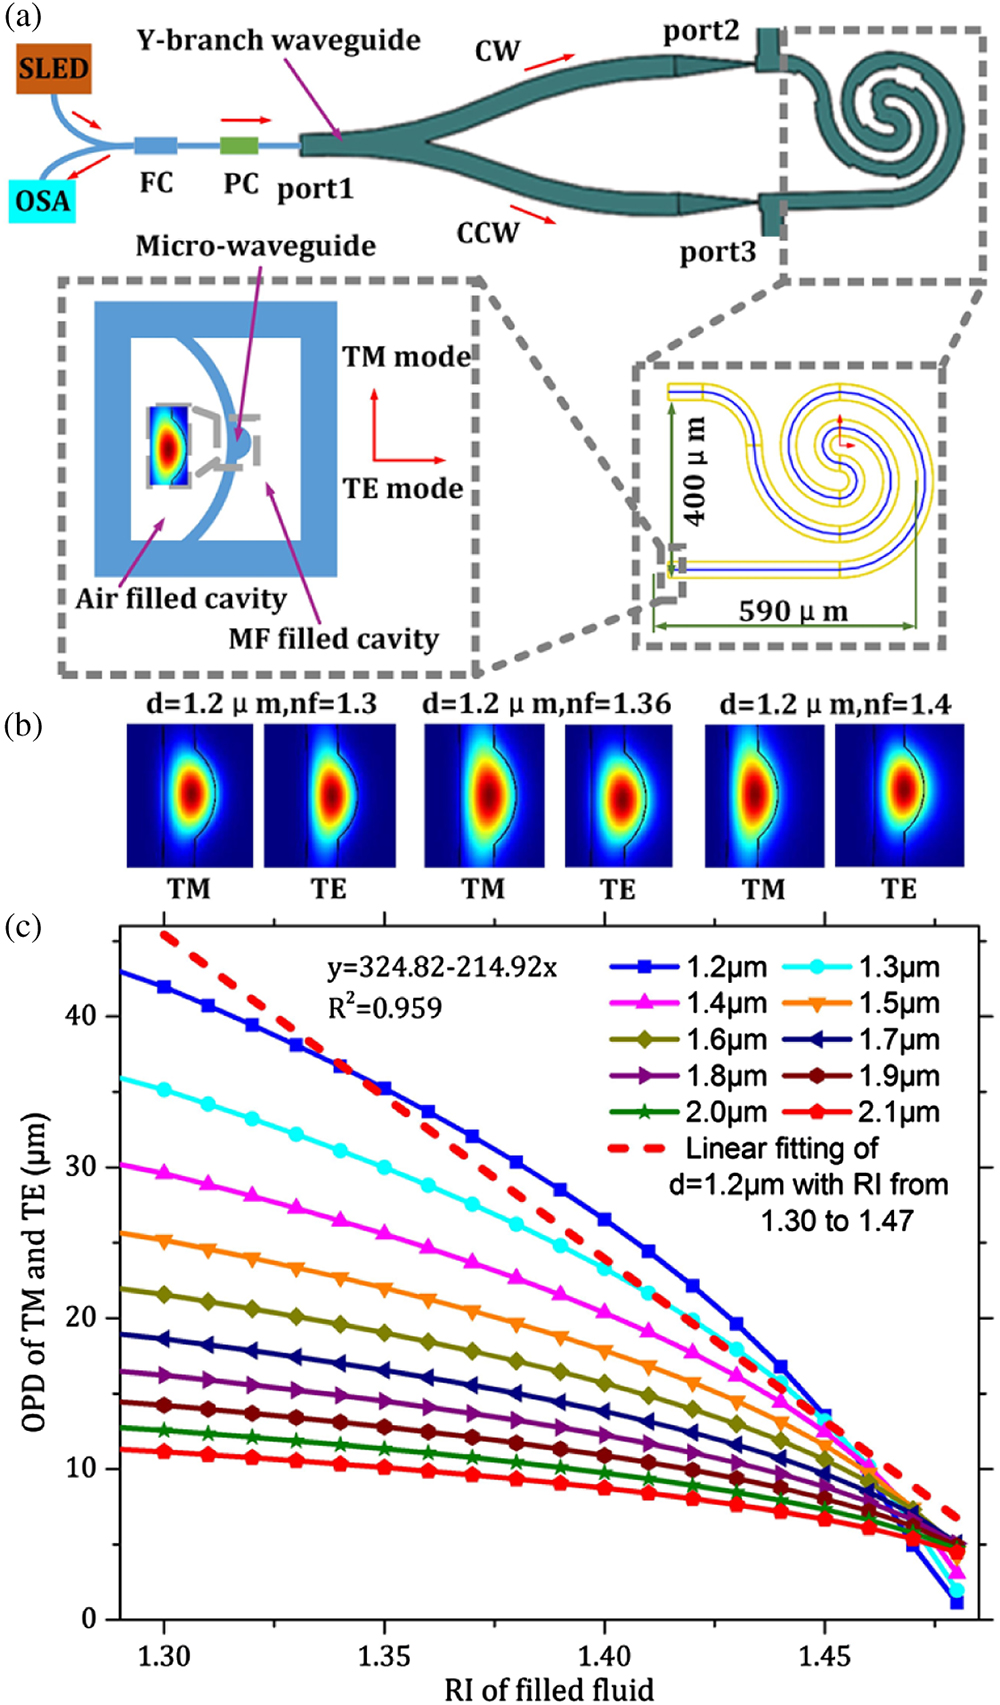 (a) Schematic diagram of the micro-SI magnetic field probe based on an SI sensor. (b) The guiding mode of D-shaped waveguide with the diameter of 1.2 μm and the analyte RI of 1.3, 1.36, and 1.4, respectively. (c) The simulation results about the effective OPD variation of the TM mode and TE mode of the D-shaped waveguide versus the fluid RI in the waveguide cavity with different waveguide diameters. SLED, superluminescent emitting diode; FC, fiber coupler; PC, polarization controller; CW, clockwise light; CCW, counterclockwise light.